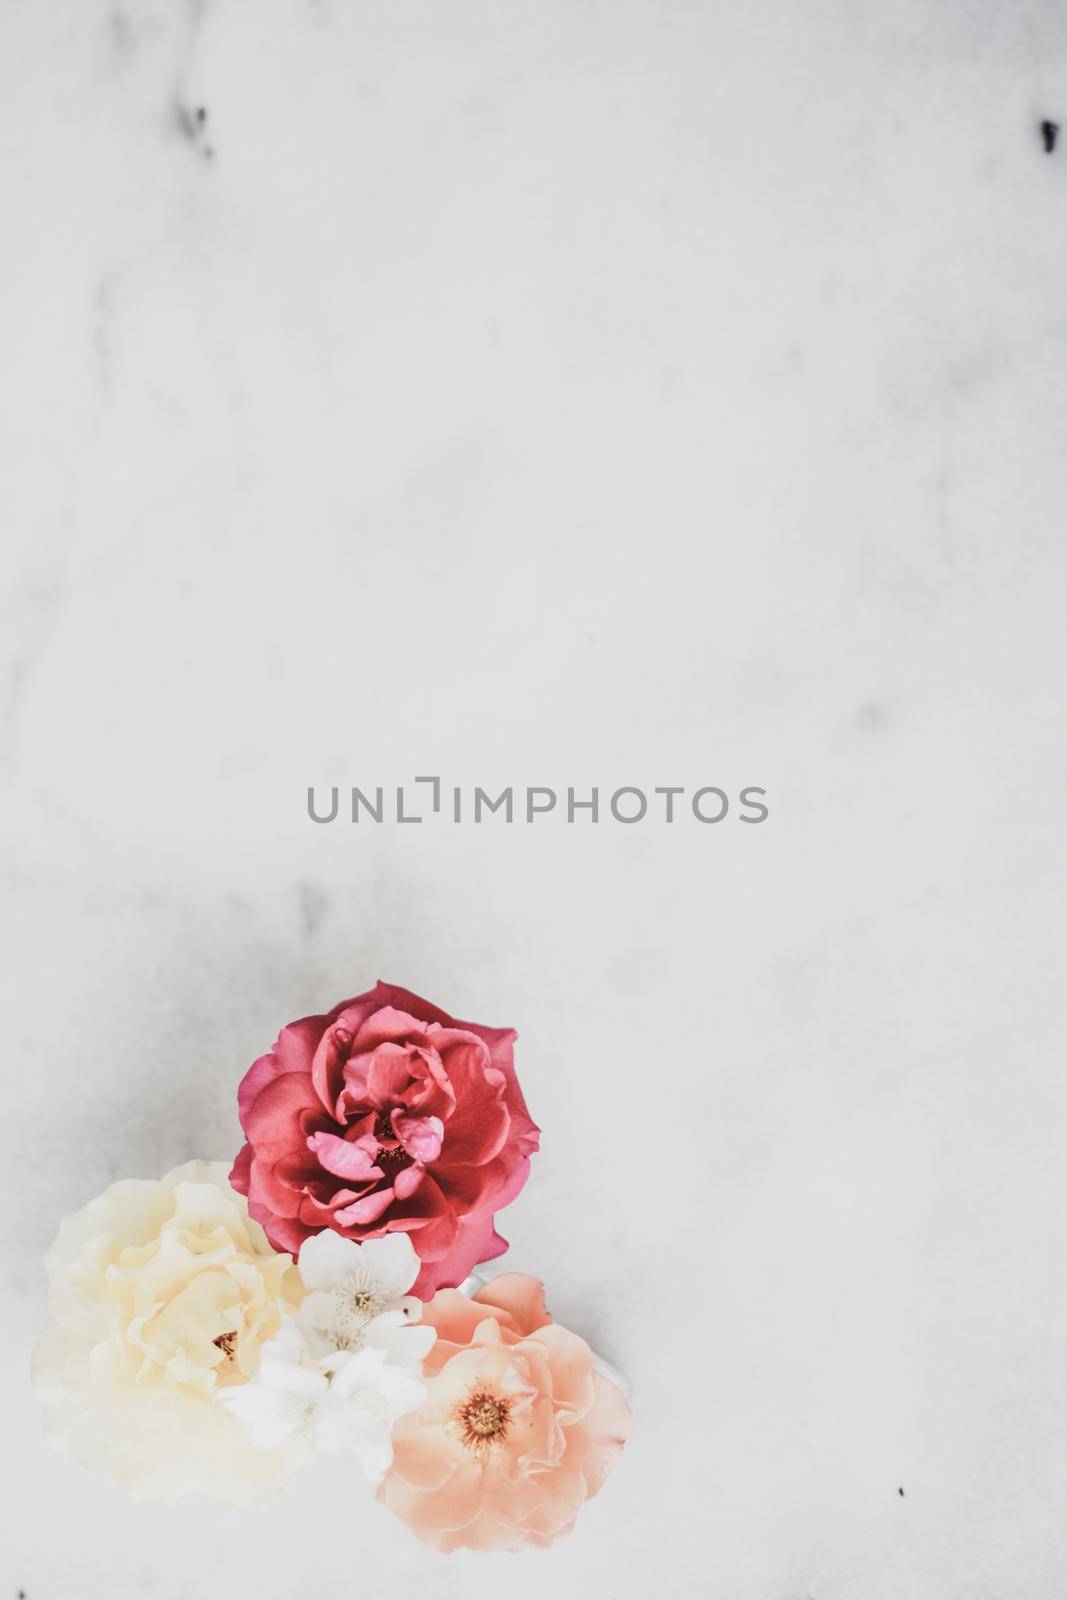 Vintage roses on marble by Anneleven